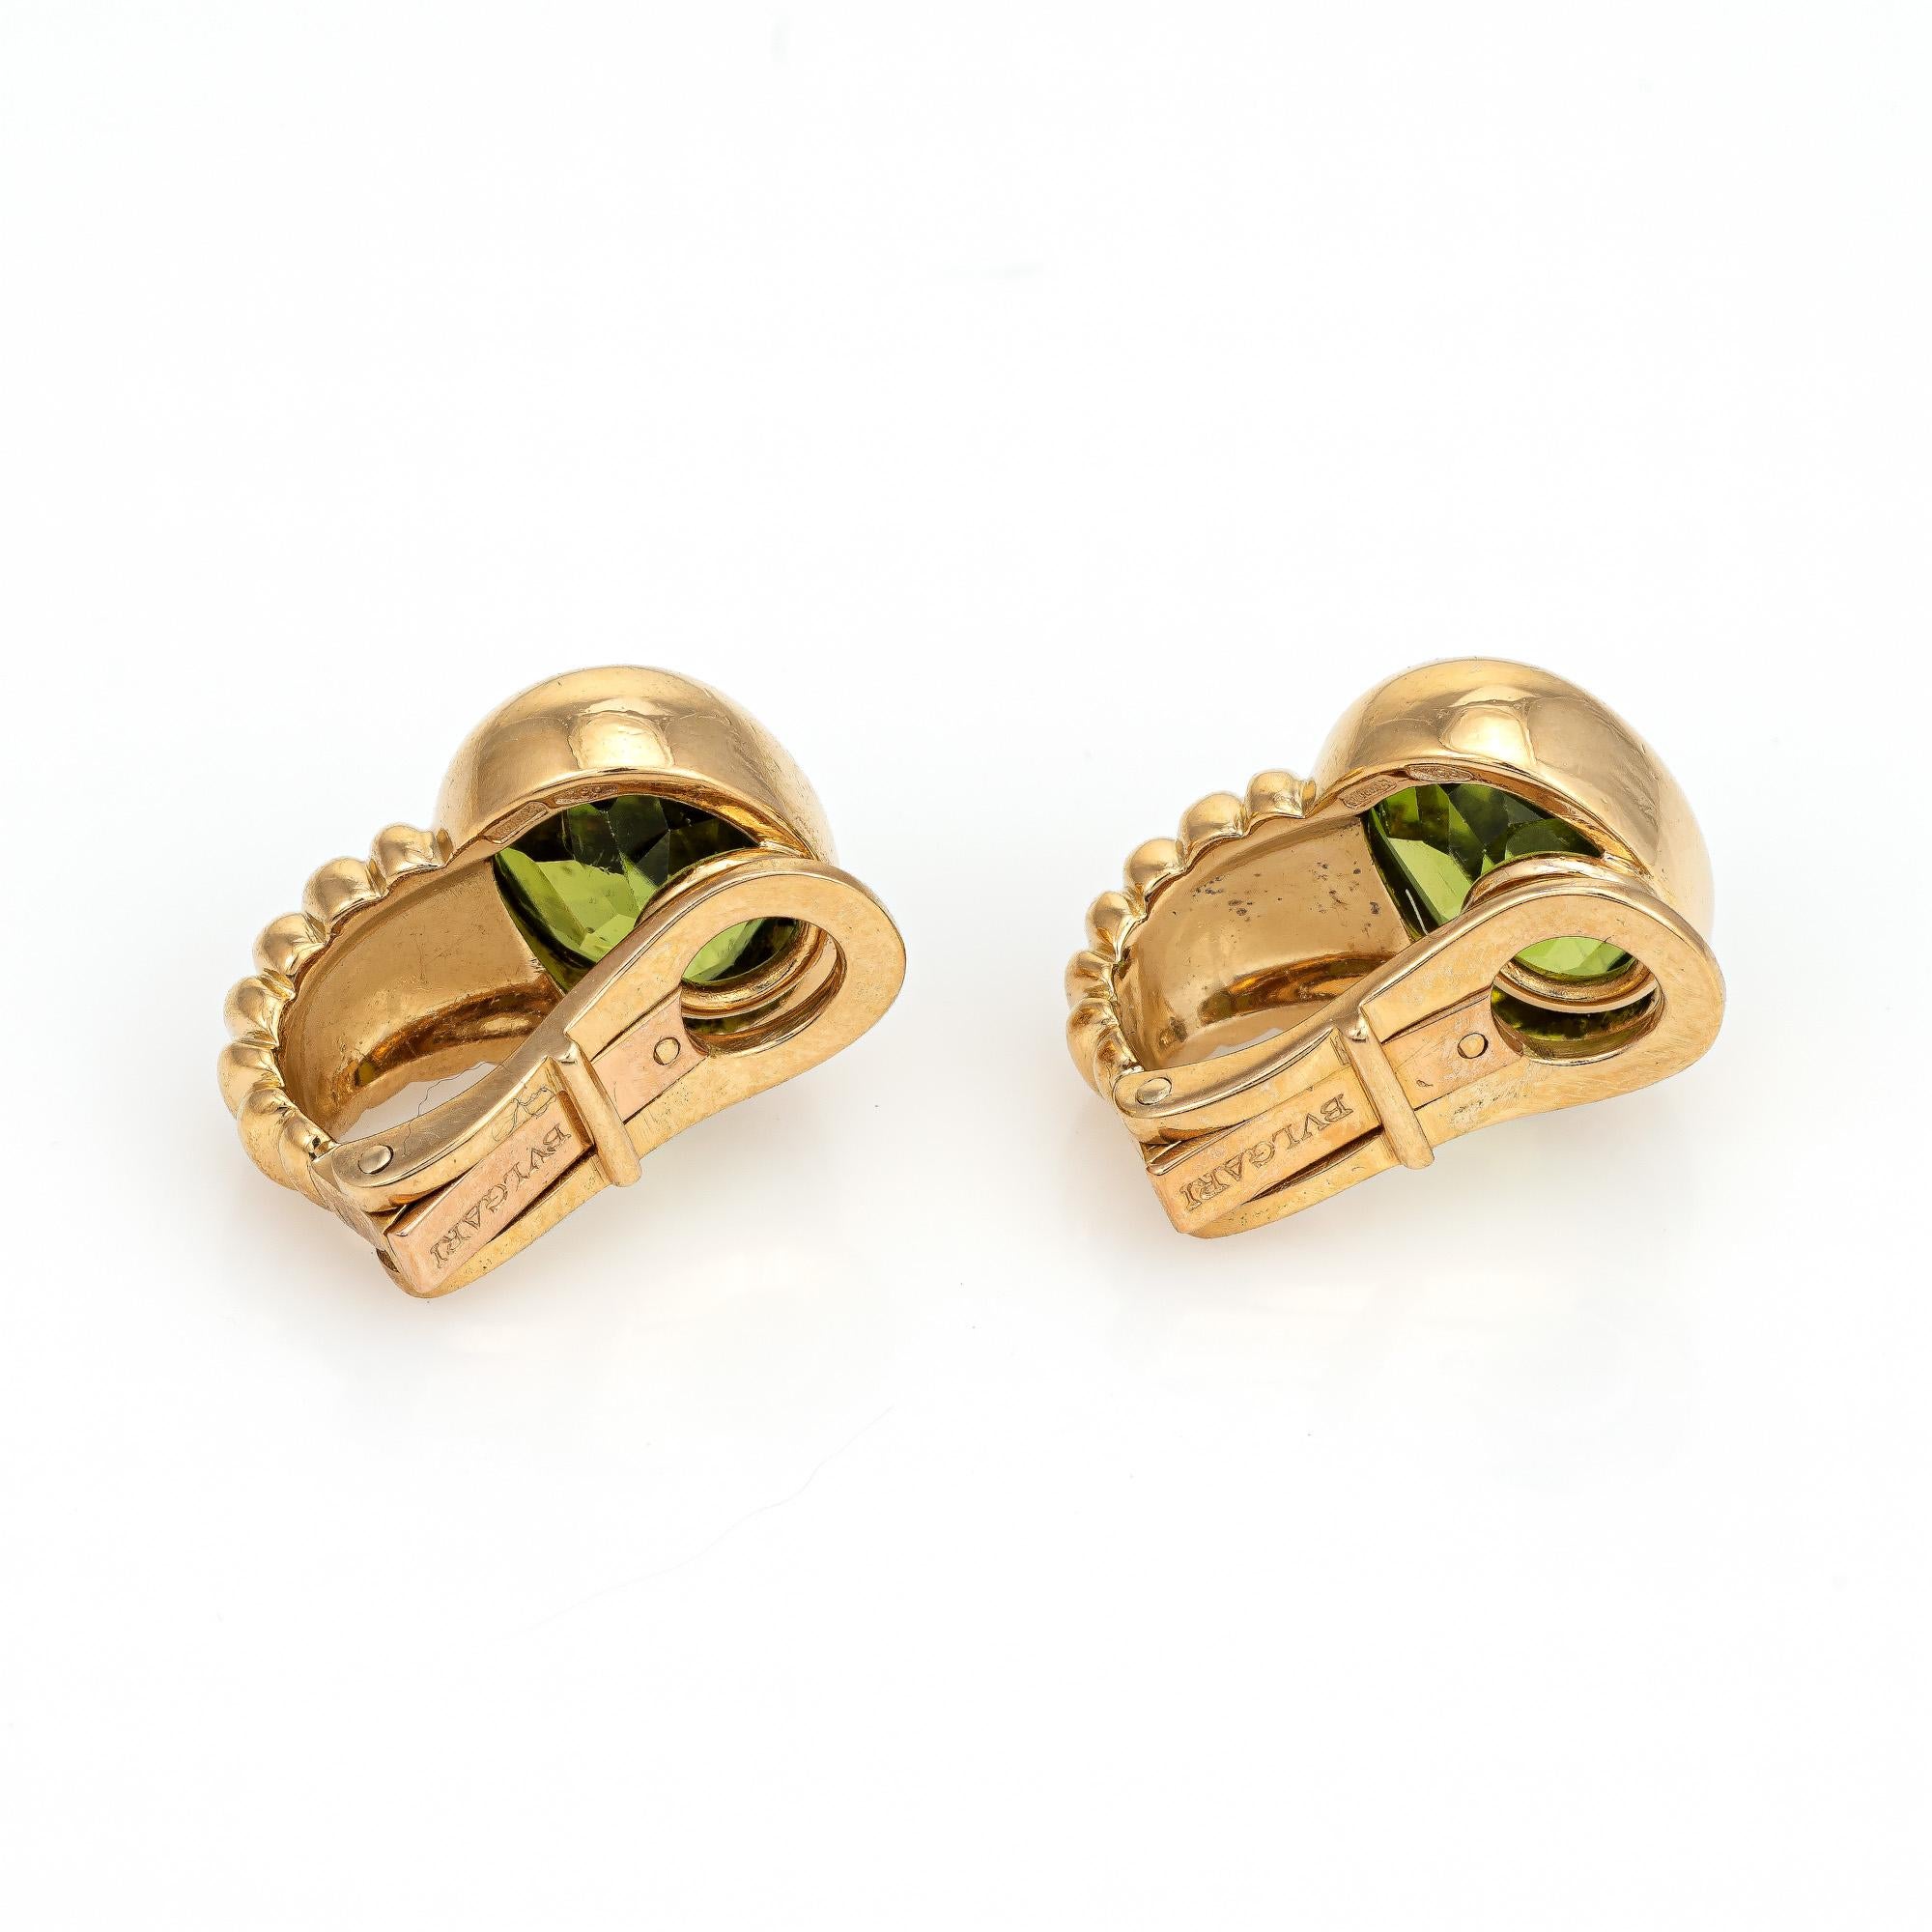 Finely detailed pair of vintage Bulgari peridot earrings (circa 1980s) crafted in 18k yellow gold. 

Faceted oval cut peridot measures 10mm x 8mm (estimated at 2.75 carats each - 5.50 carats total estimated weight). They are in good condition and